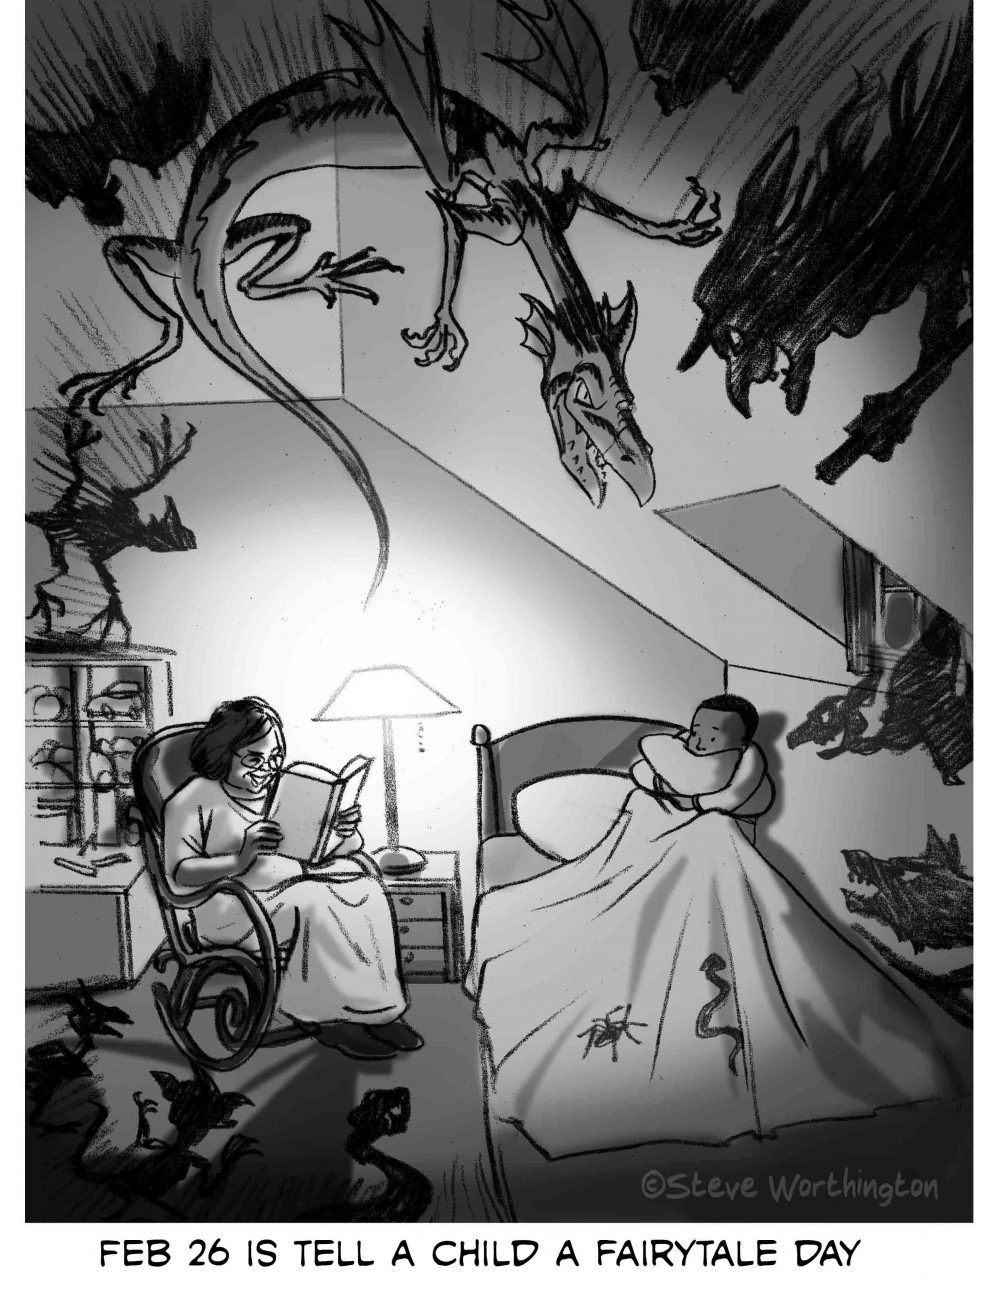 Black and white or grayscale illustration celebrating tell a child a fairytale day. A scared child is being read frightening stories by his grandmother.